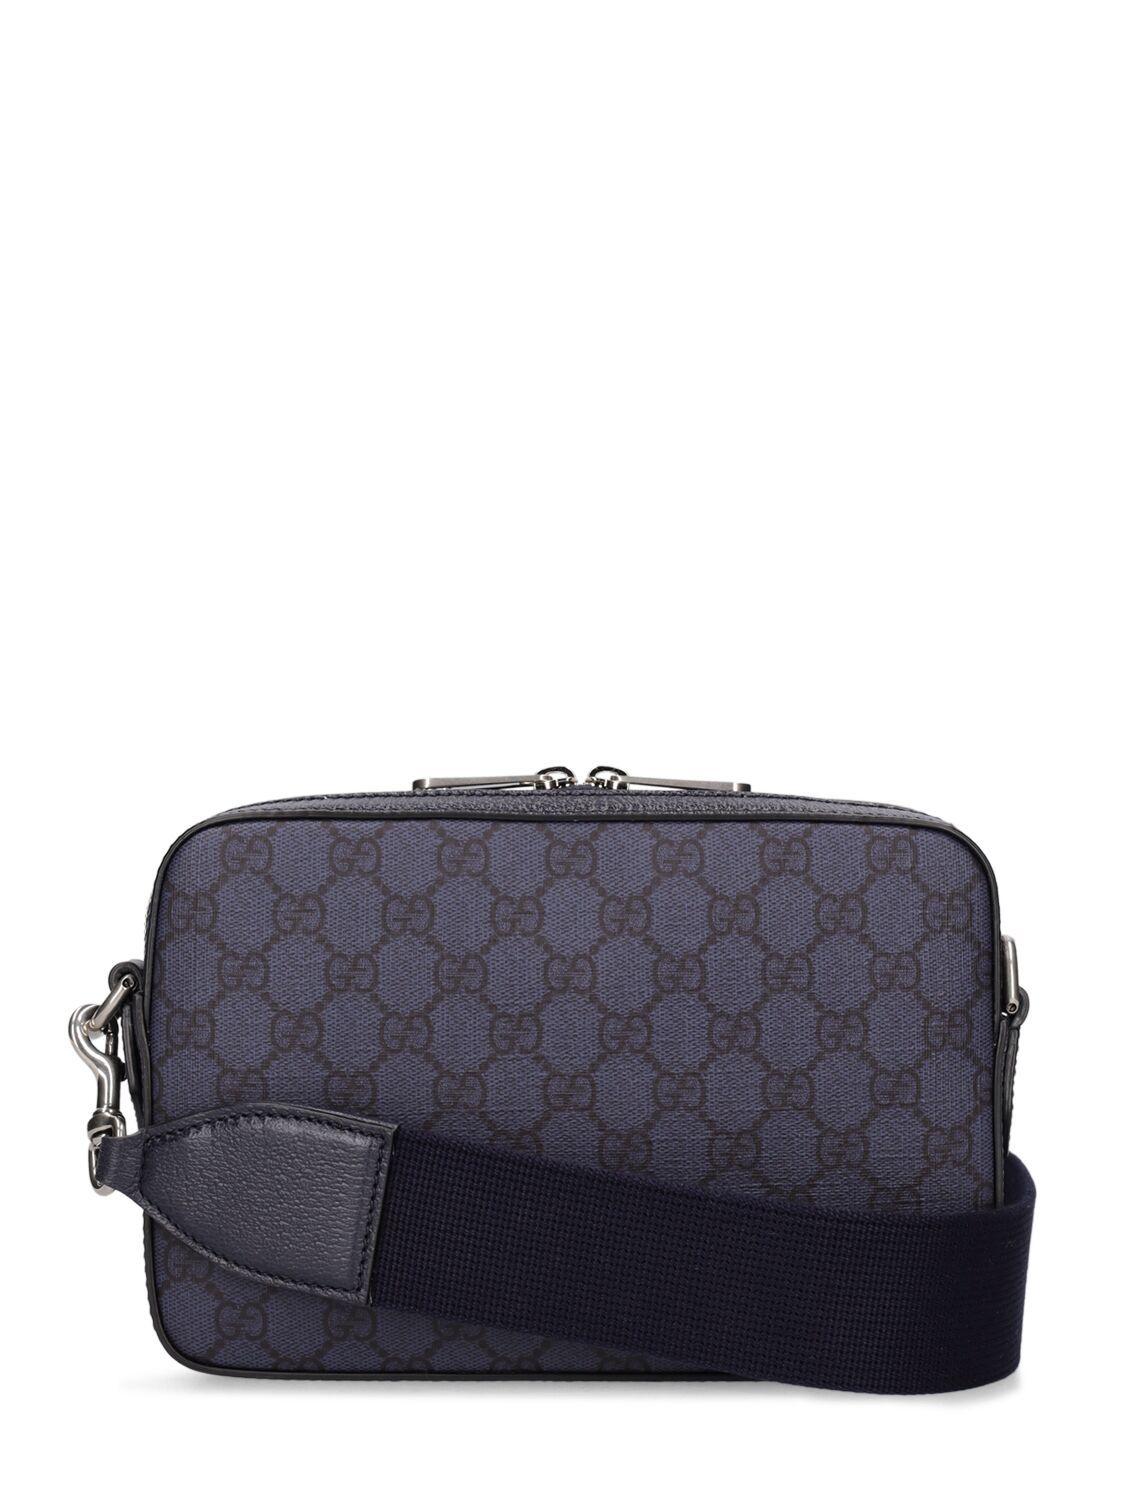 Gucci Ophidia gg Supreme Crossbody Bag in Blue for Men